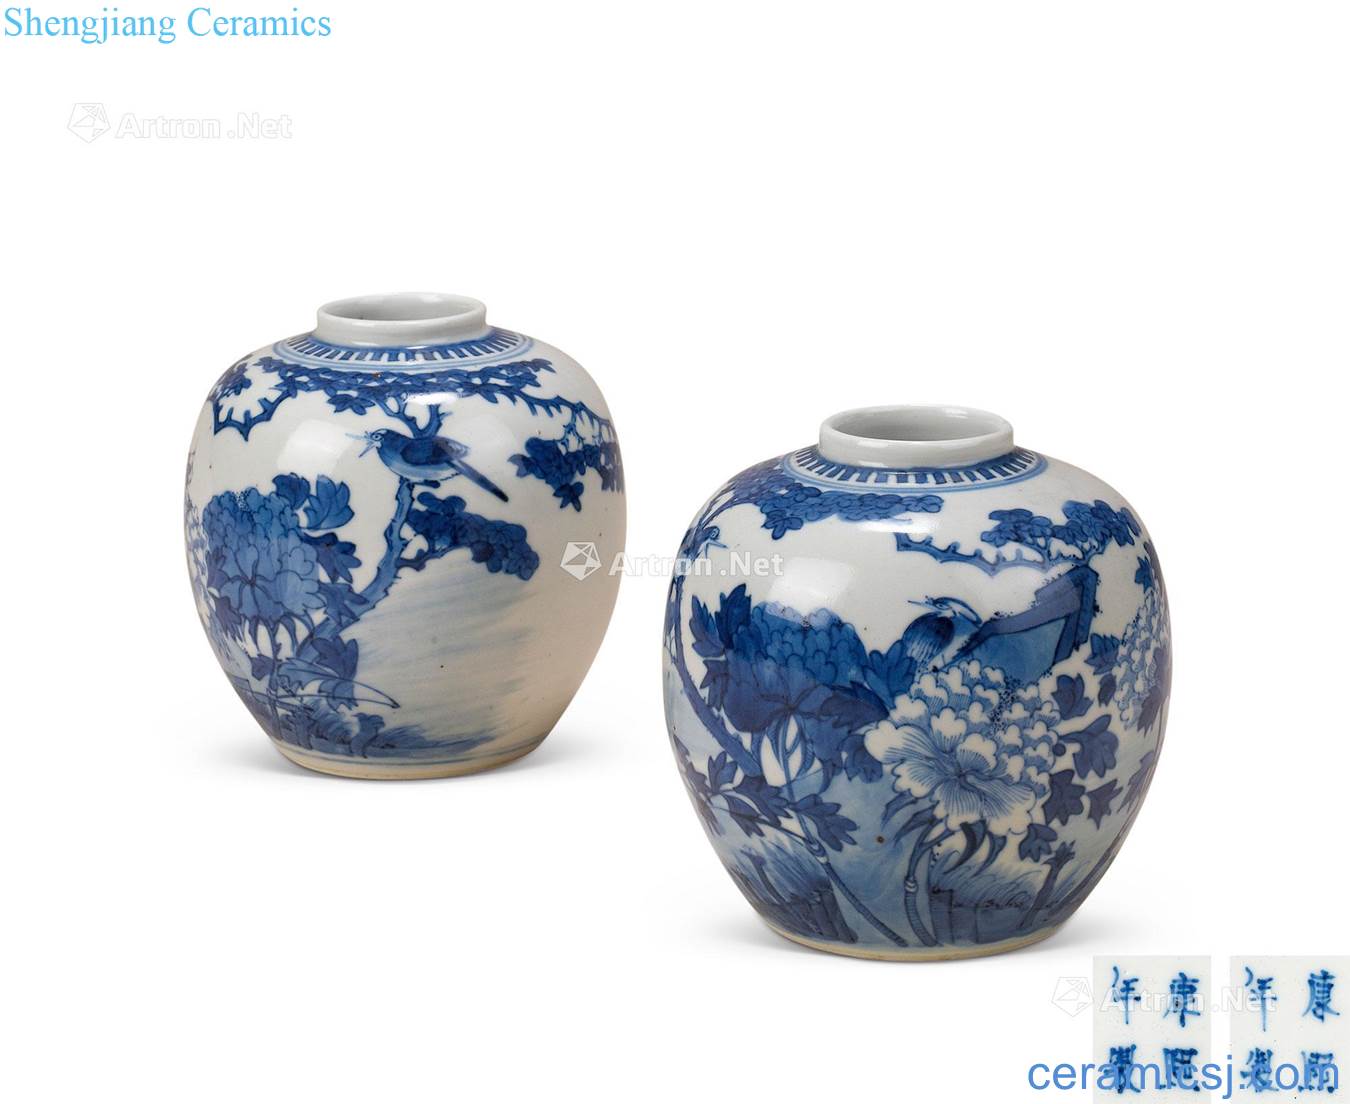 The late qing dynasty Blue and white flower on grain POTS (a)